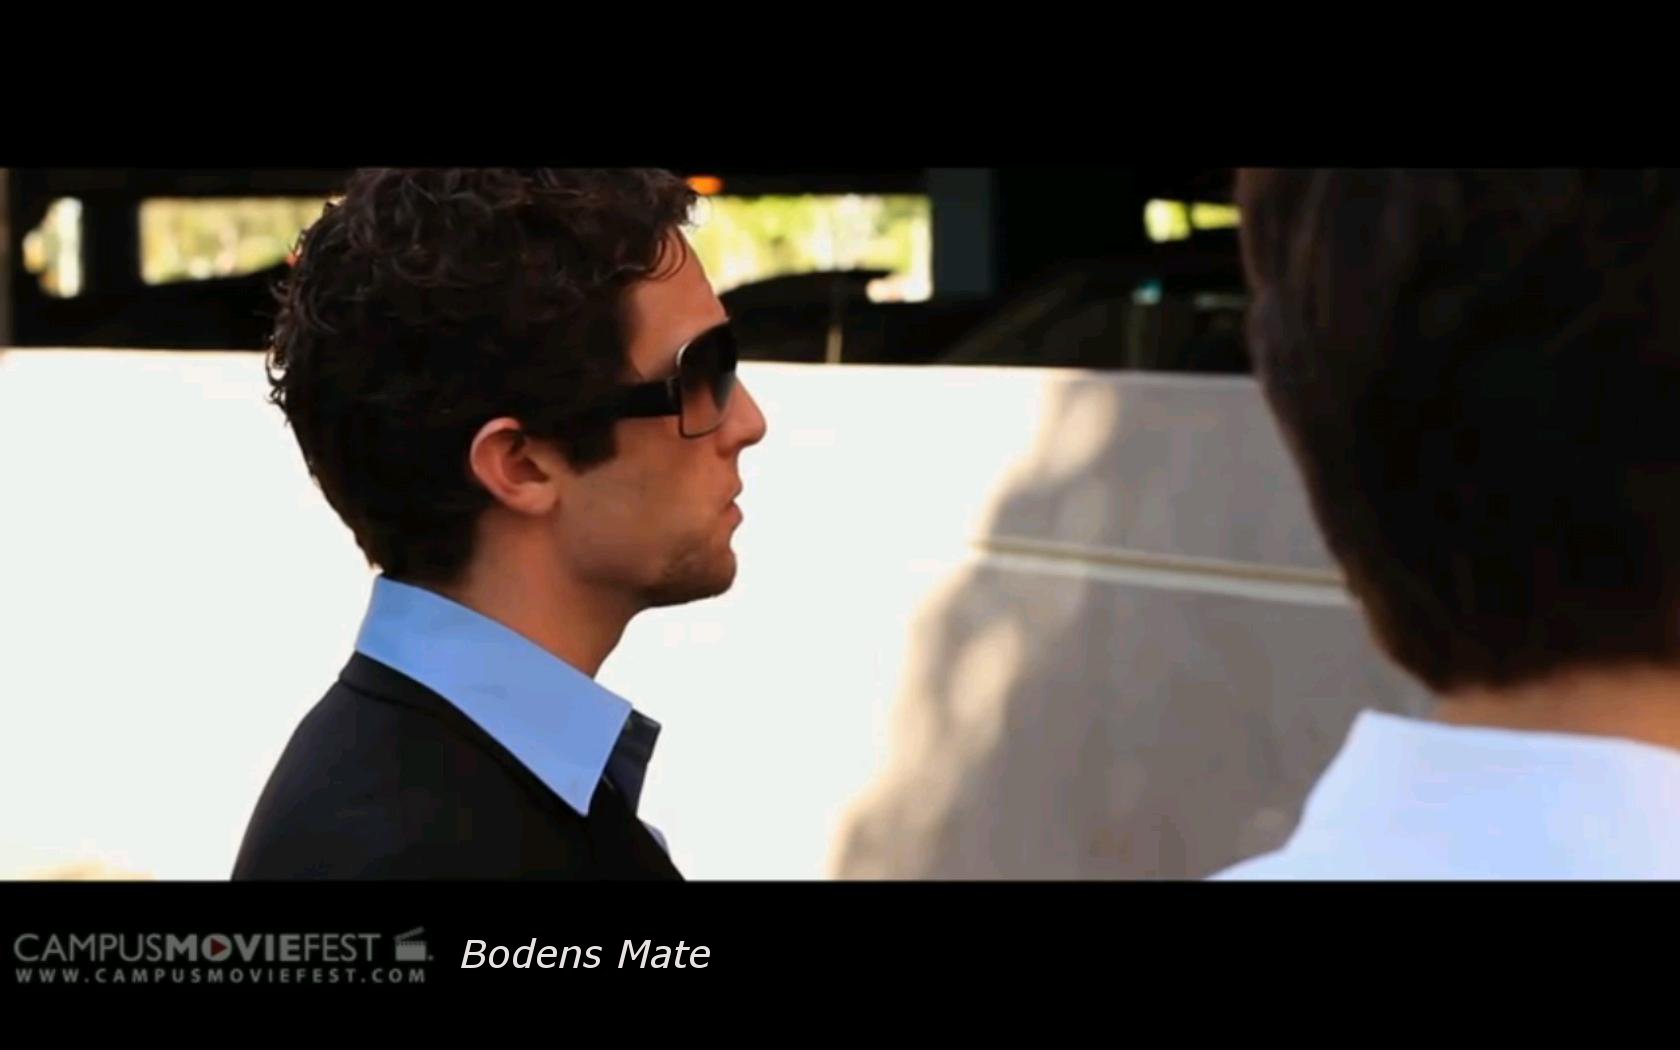 Boden's Mate Directed by Keenan Mock